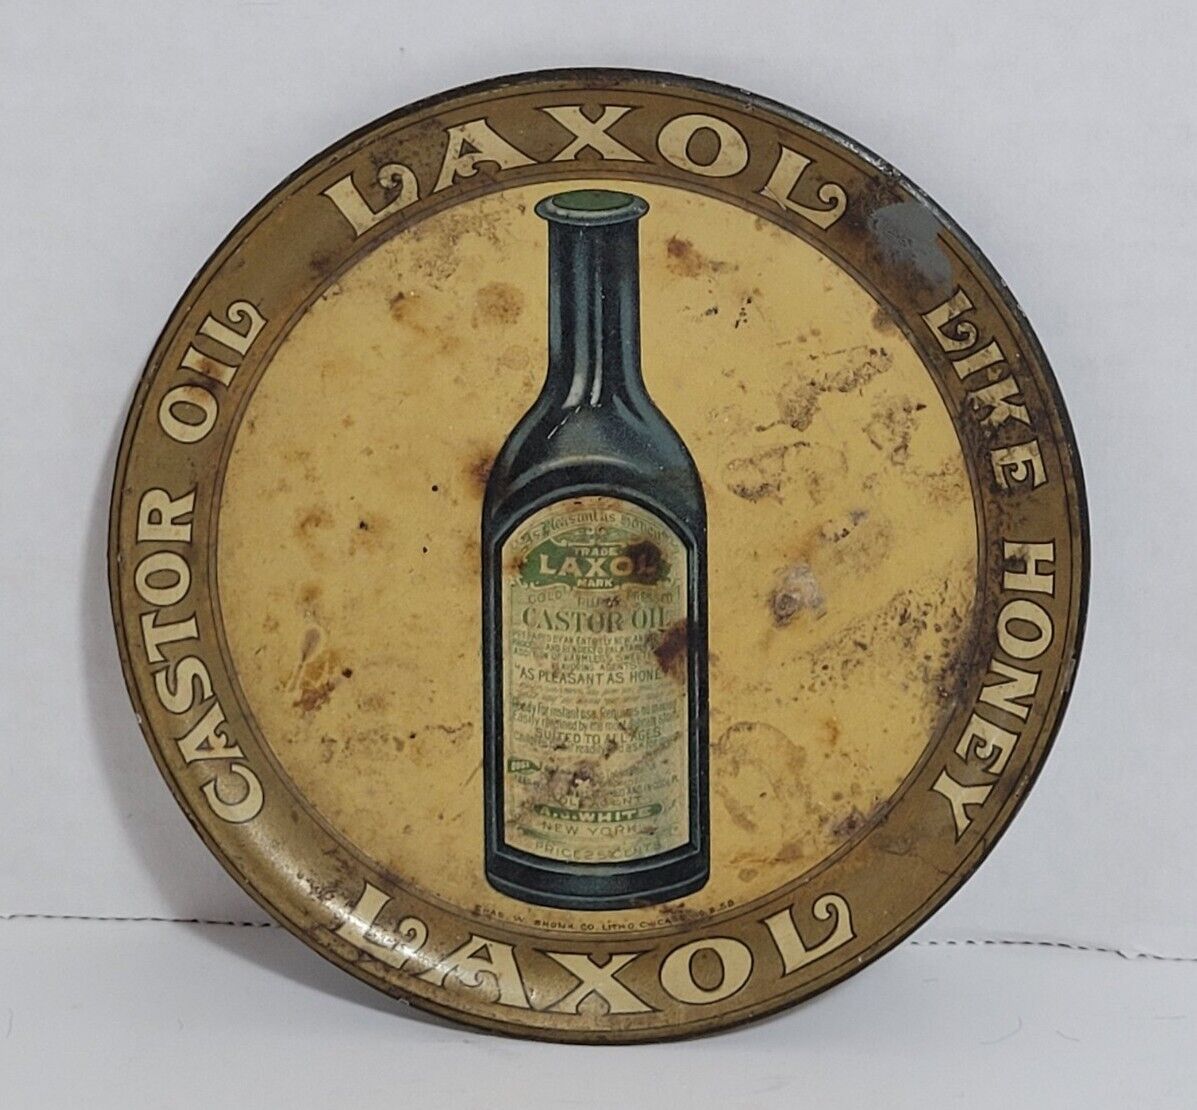 LAXOL CASTOR OIL VINTAGE TIN TIP TRAY Advertising Collectible